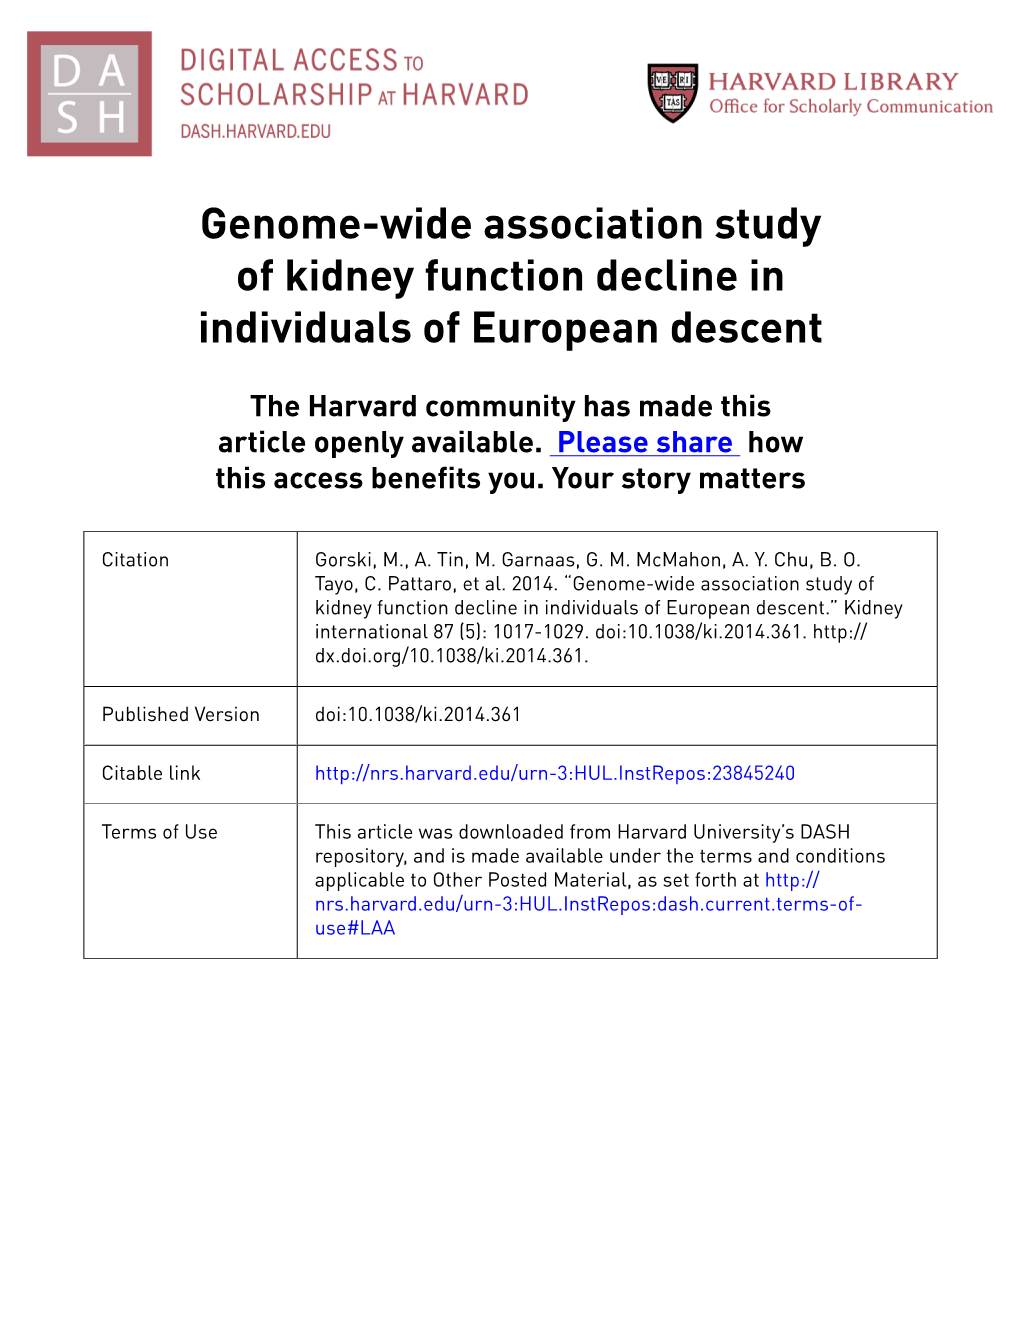 Genome-Wide Association Study of Kidney Function Decline in Individuals of European Descent